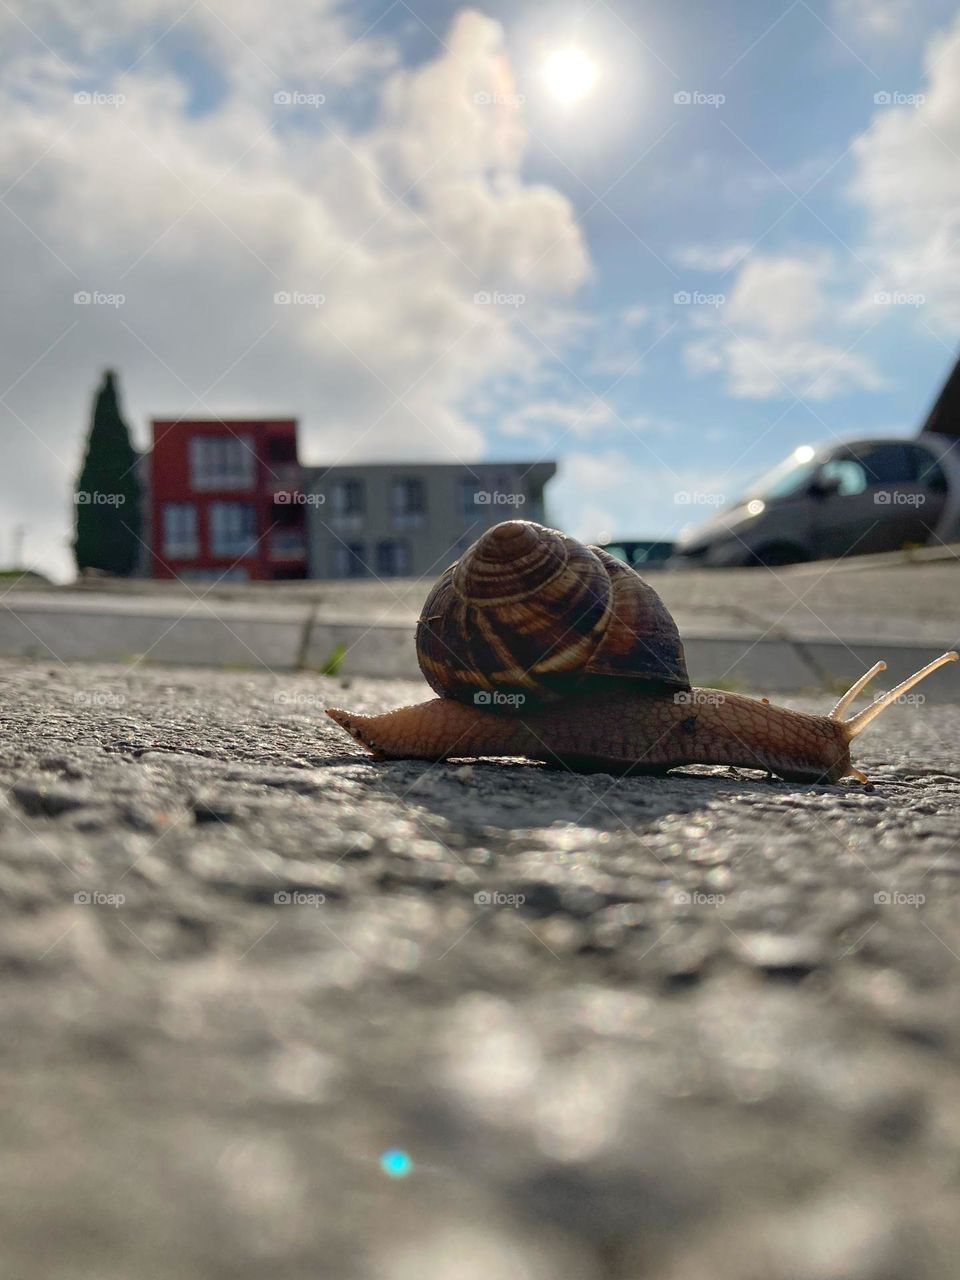 Snail on the ground 